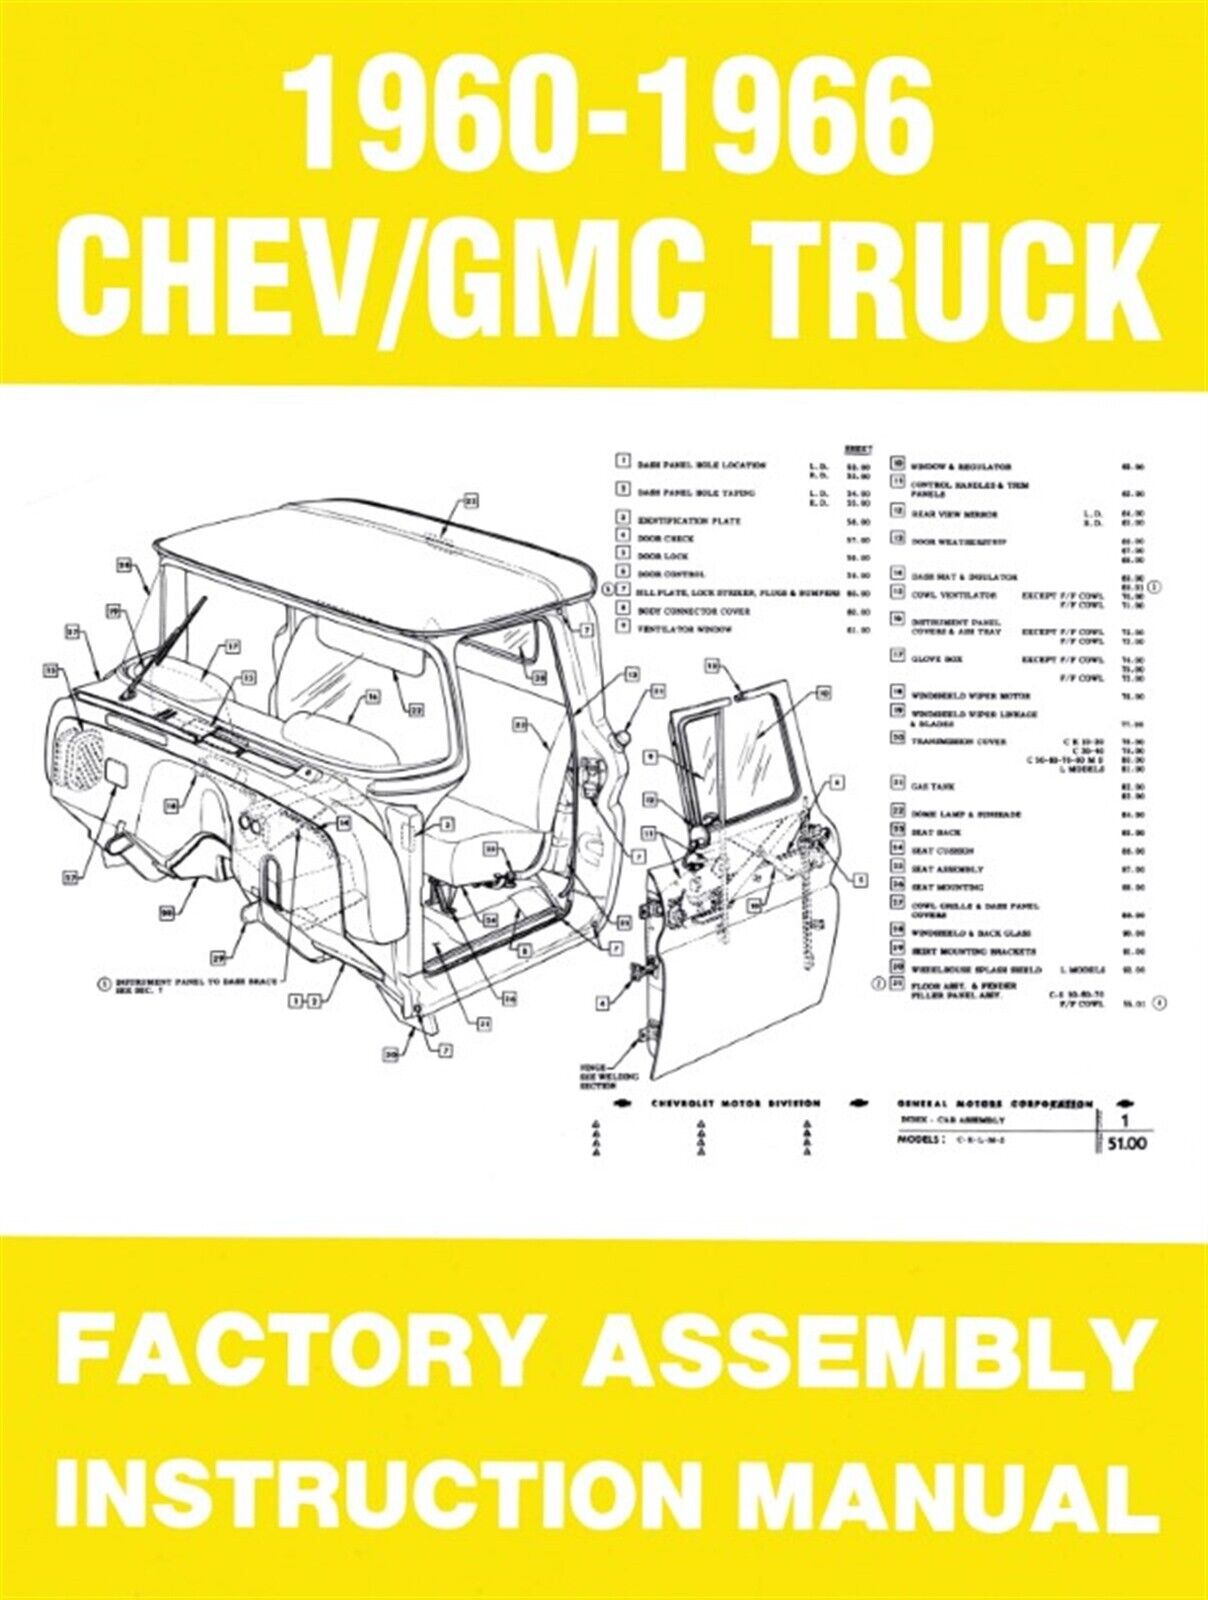 1960-1966 Chevrolet, GMC Truck Factory Assembly Manual